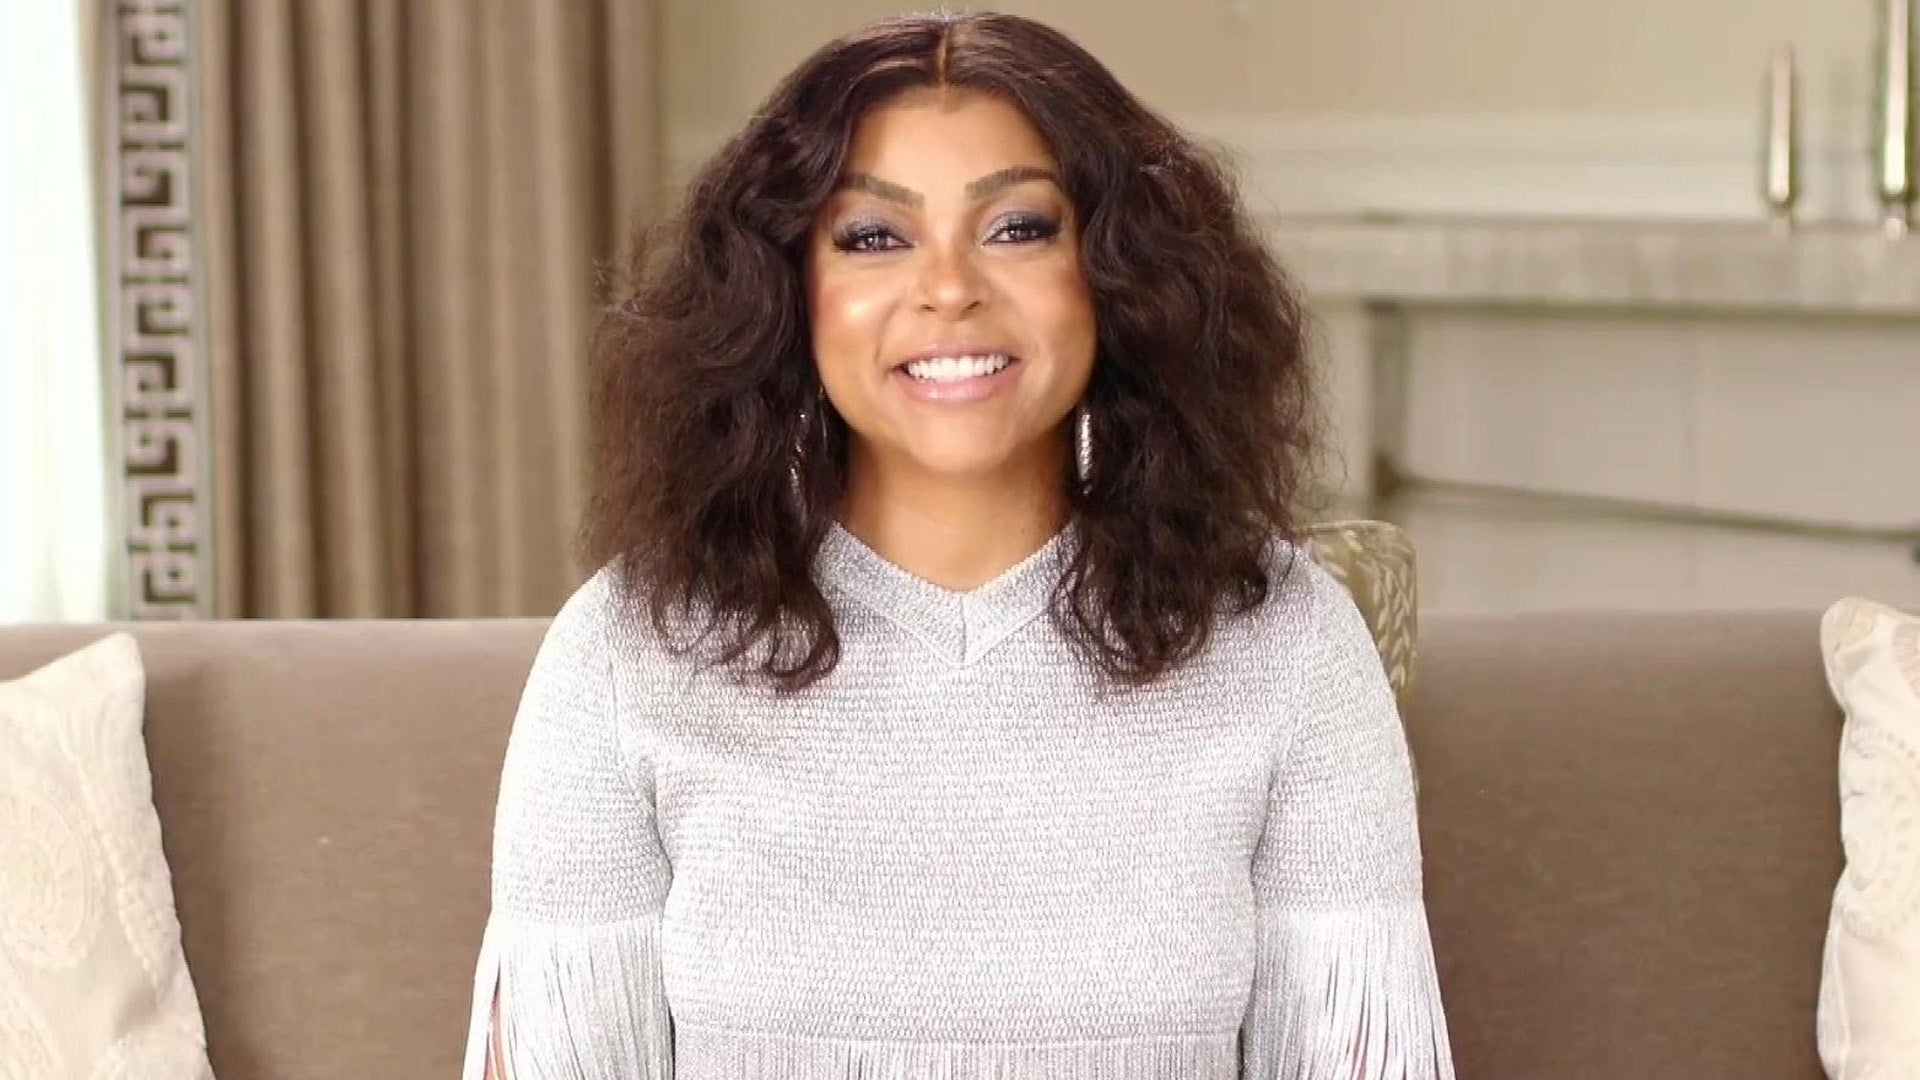 2022 BET Awards Host Taraji P. Henson and Show Producers Preview What